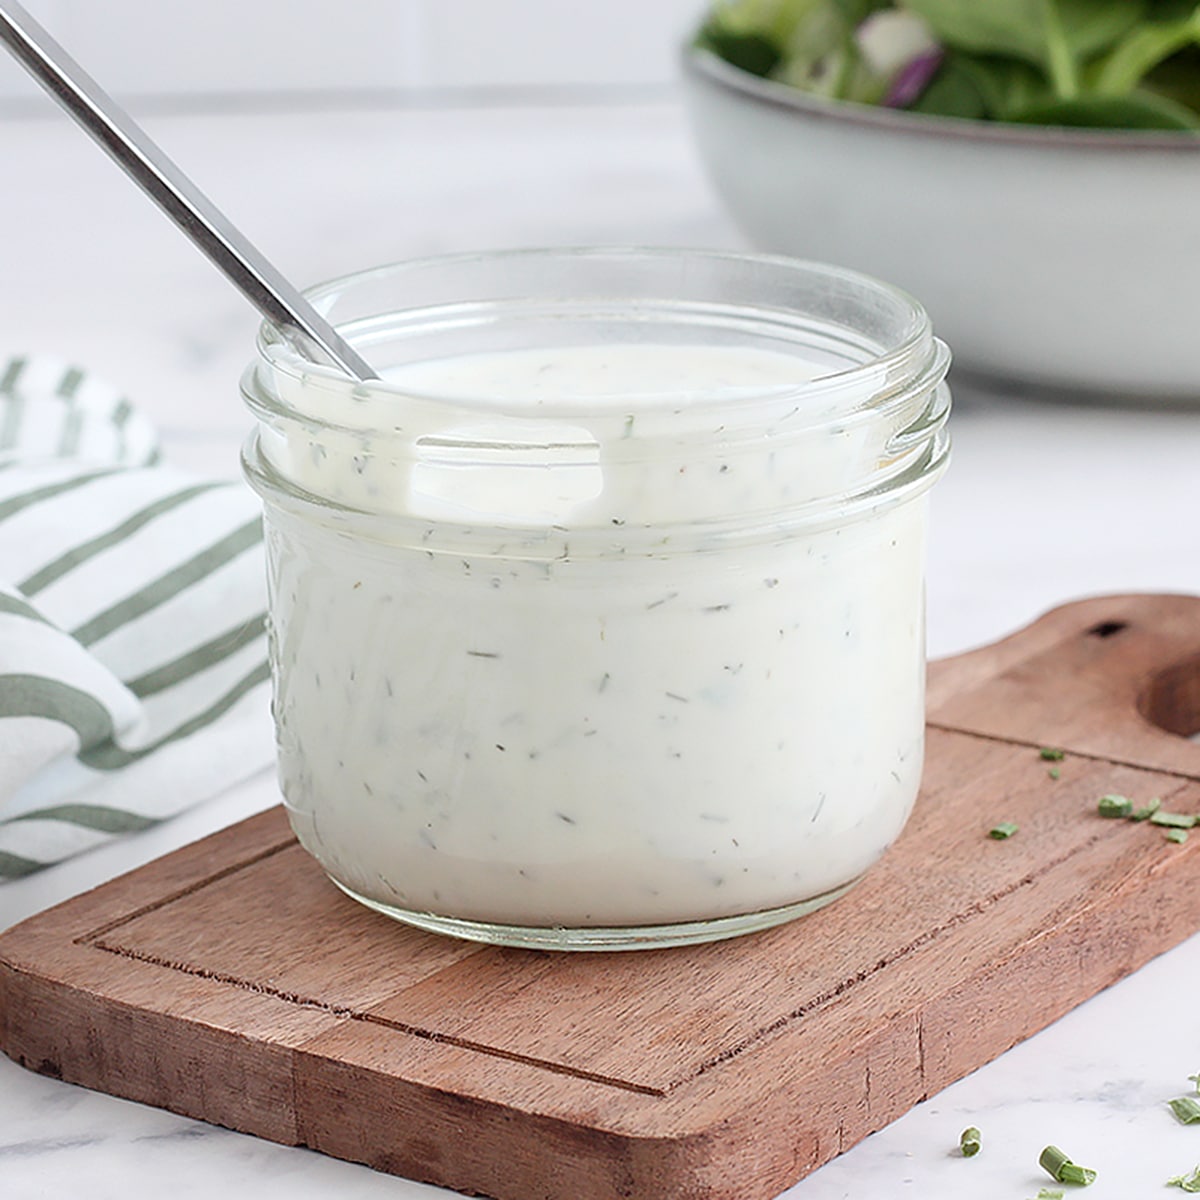 A small glass jar of ranch dressing with a striped linen and a metal spoon.